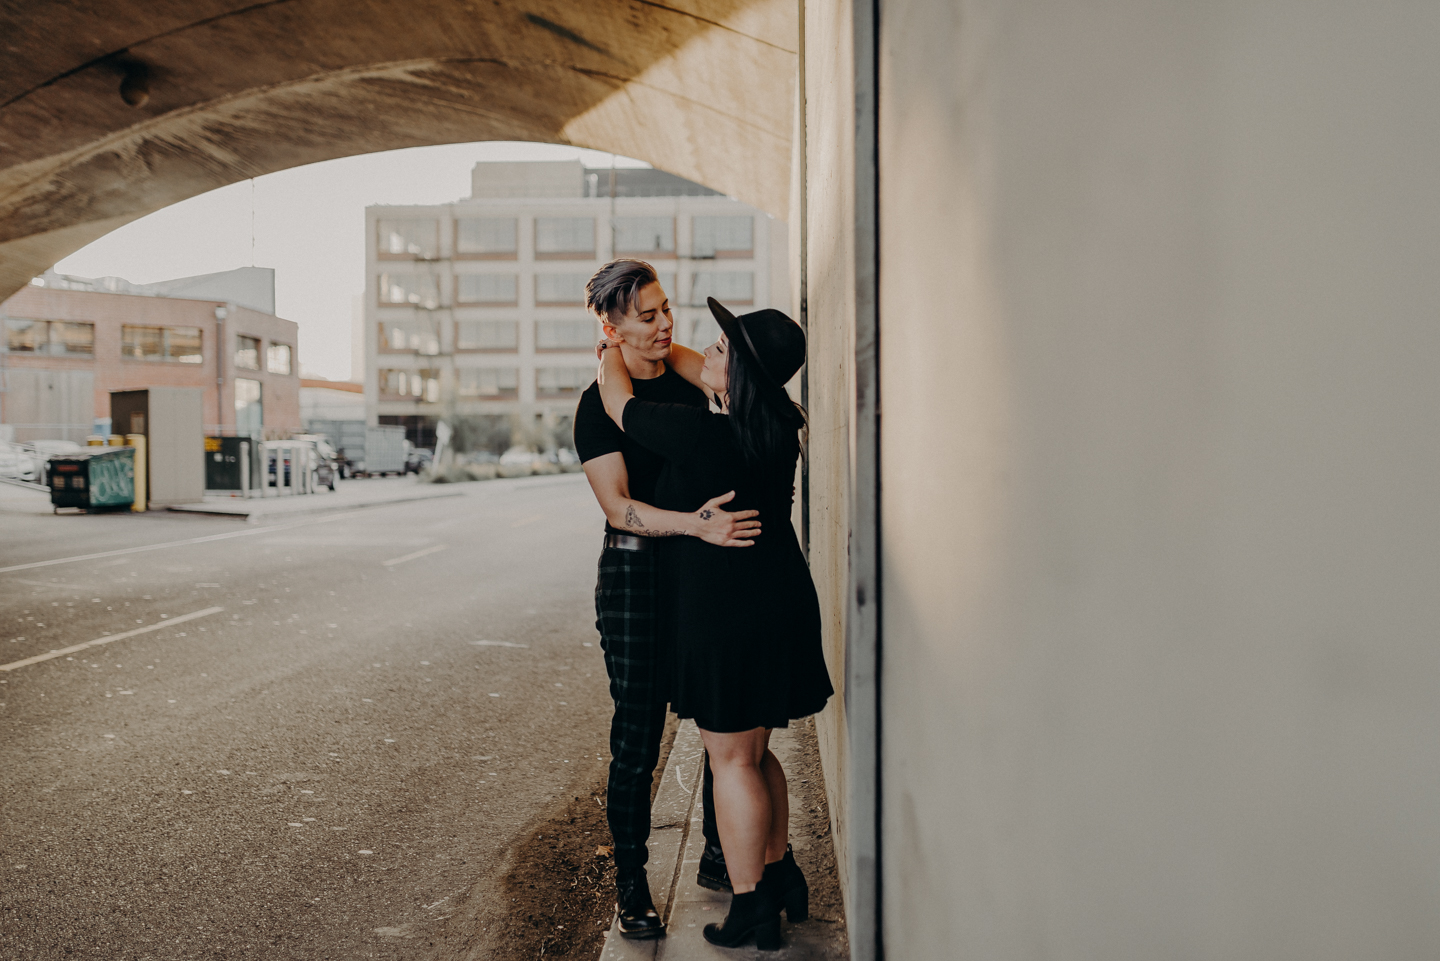 queer wedding photographer in los angeles - lesbian engagement session los angeles - isaiahandtaylor.com-018.jpg